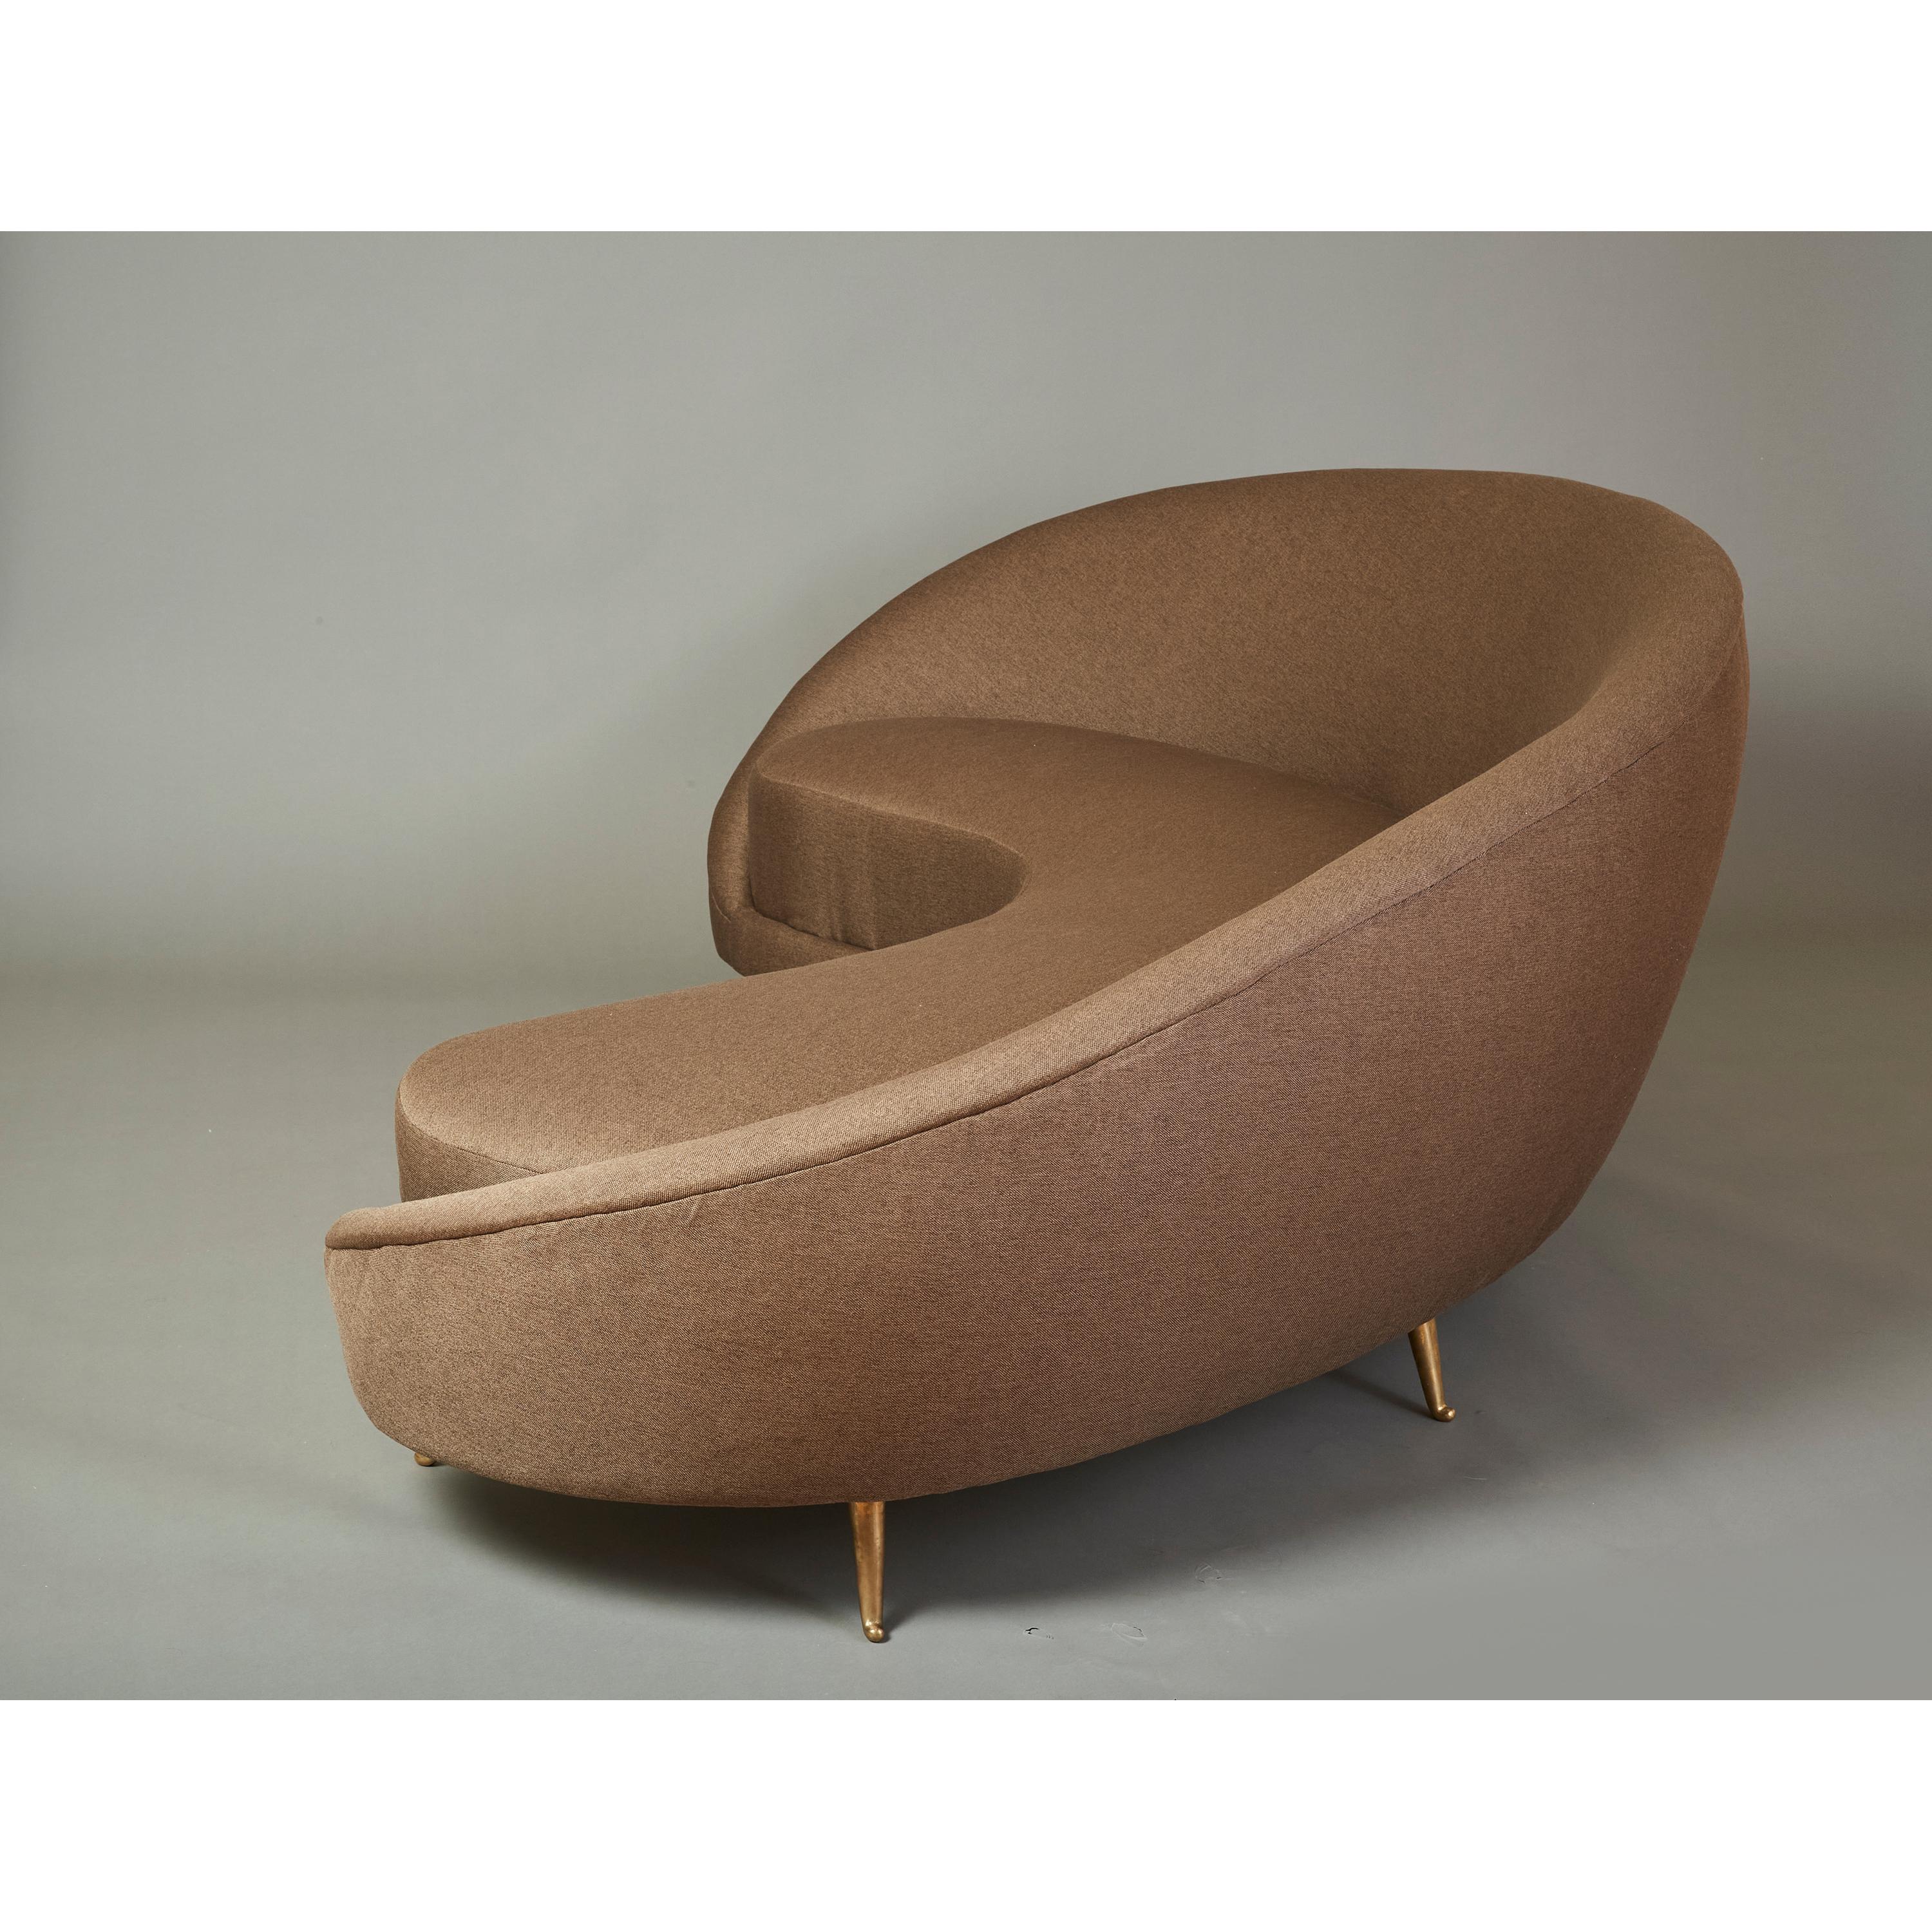 Mid-20th Century Federico Munari Curved Boomerang Sofa with Polished Brass Legs, Italy 1950's For Sale